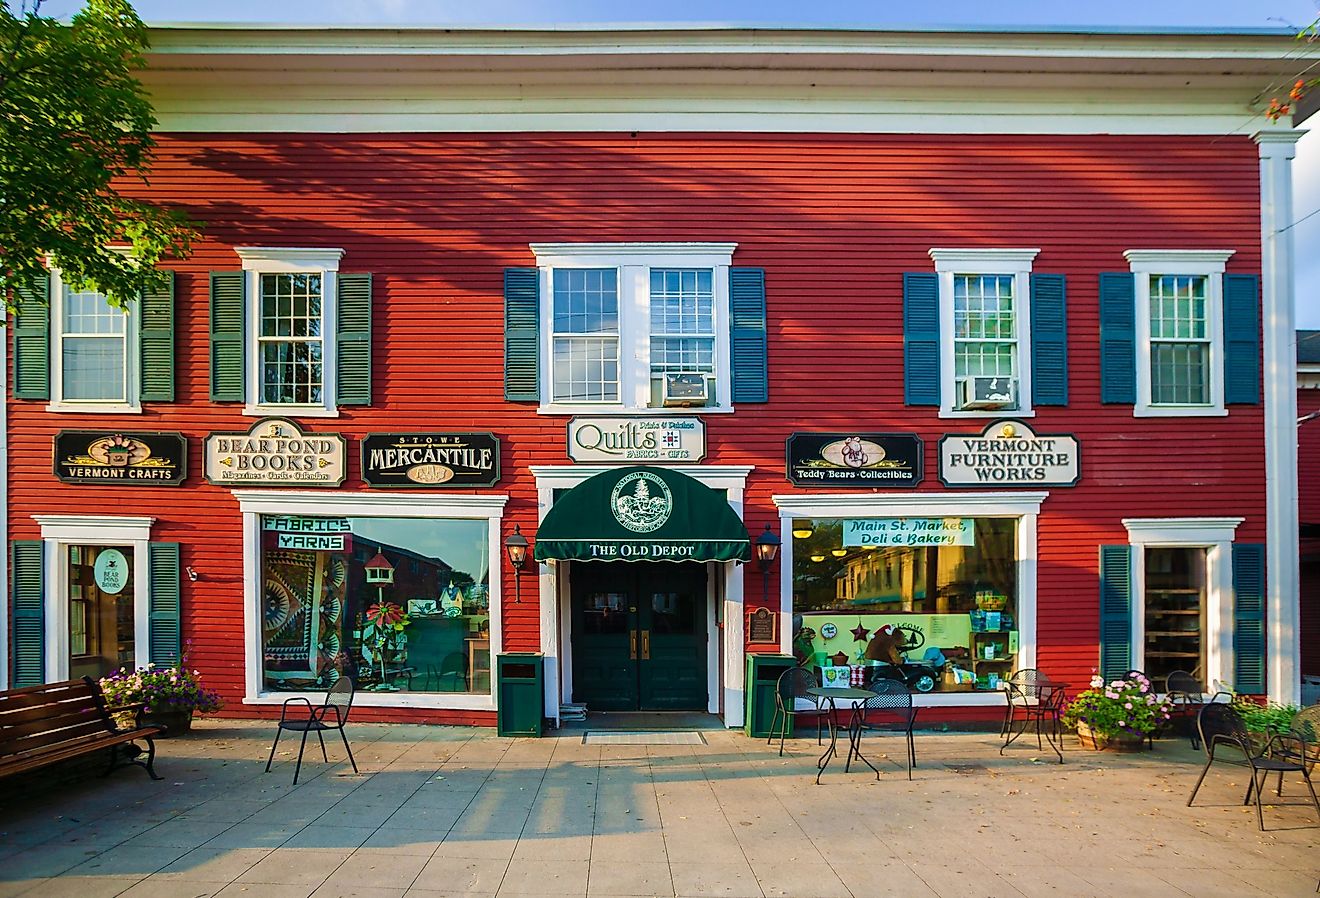 Small storefronts and boutiques in Stowe, Vermont. Image credit Don Landwehrle via Shutterstock.